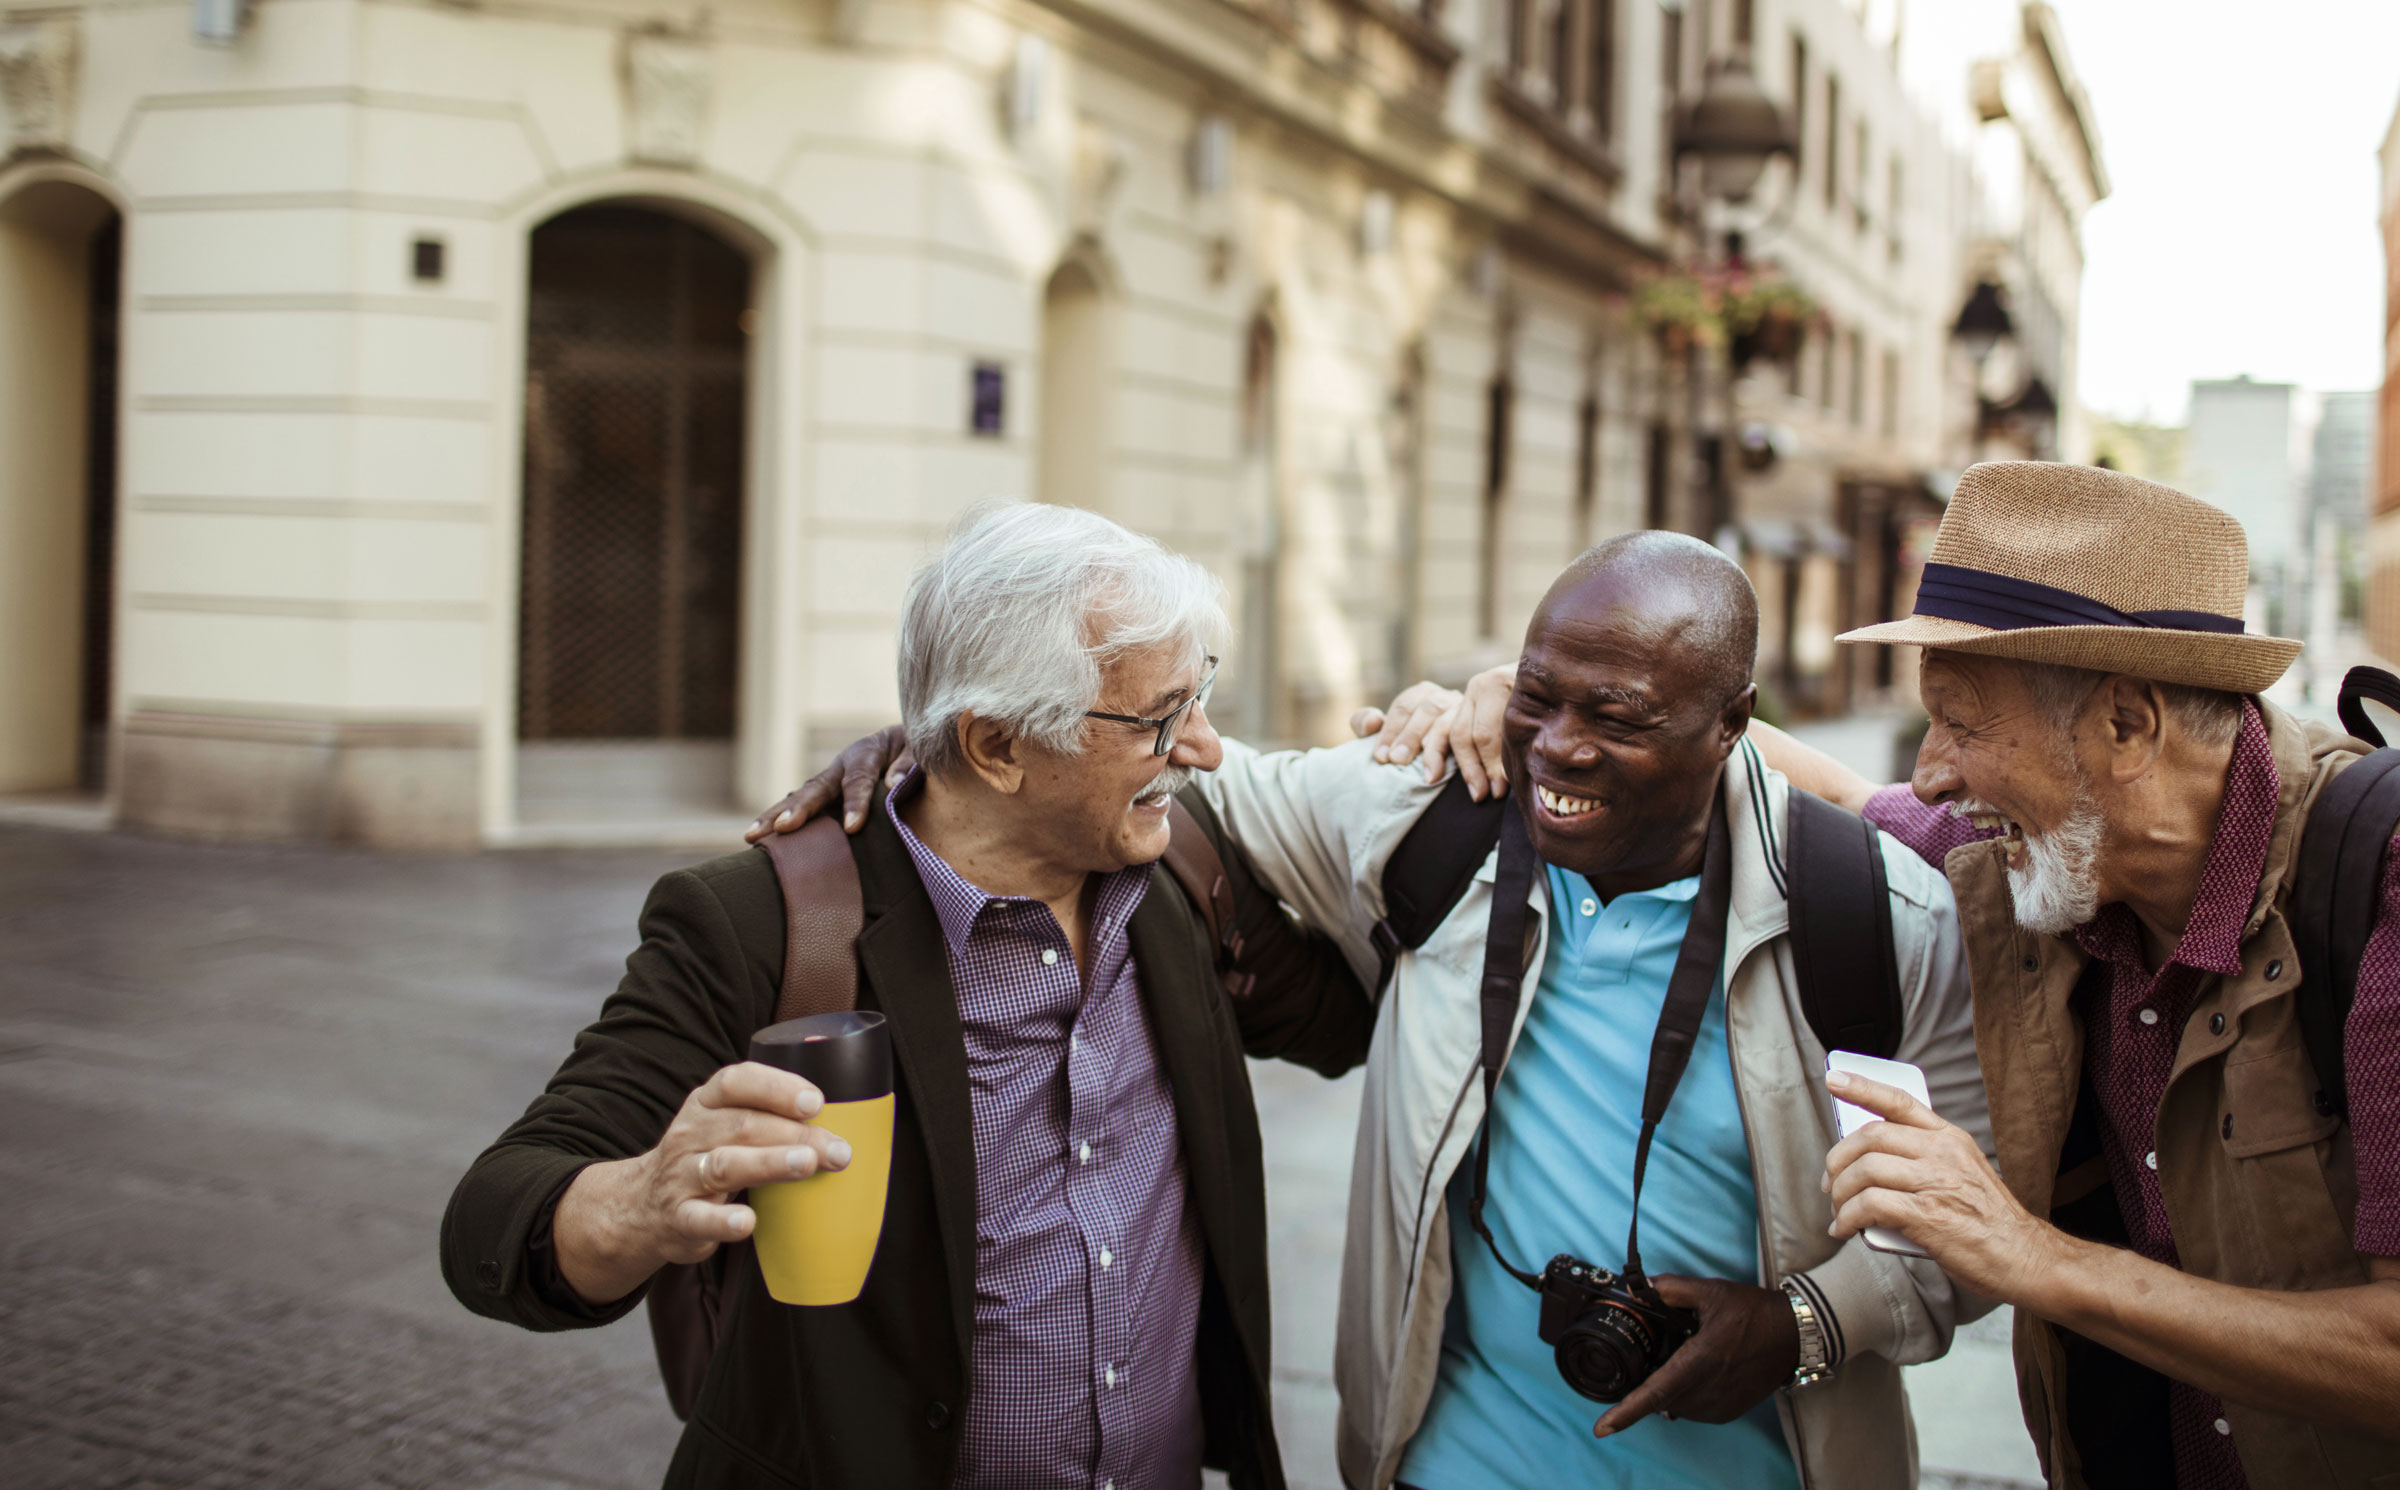 Three older men share a laugh with arms around each other’s shoulders while on a picturesque street. One holds a travel mug, one a camera, the other a cell phone.